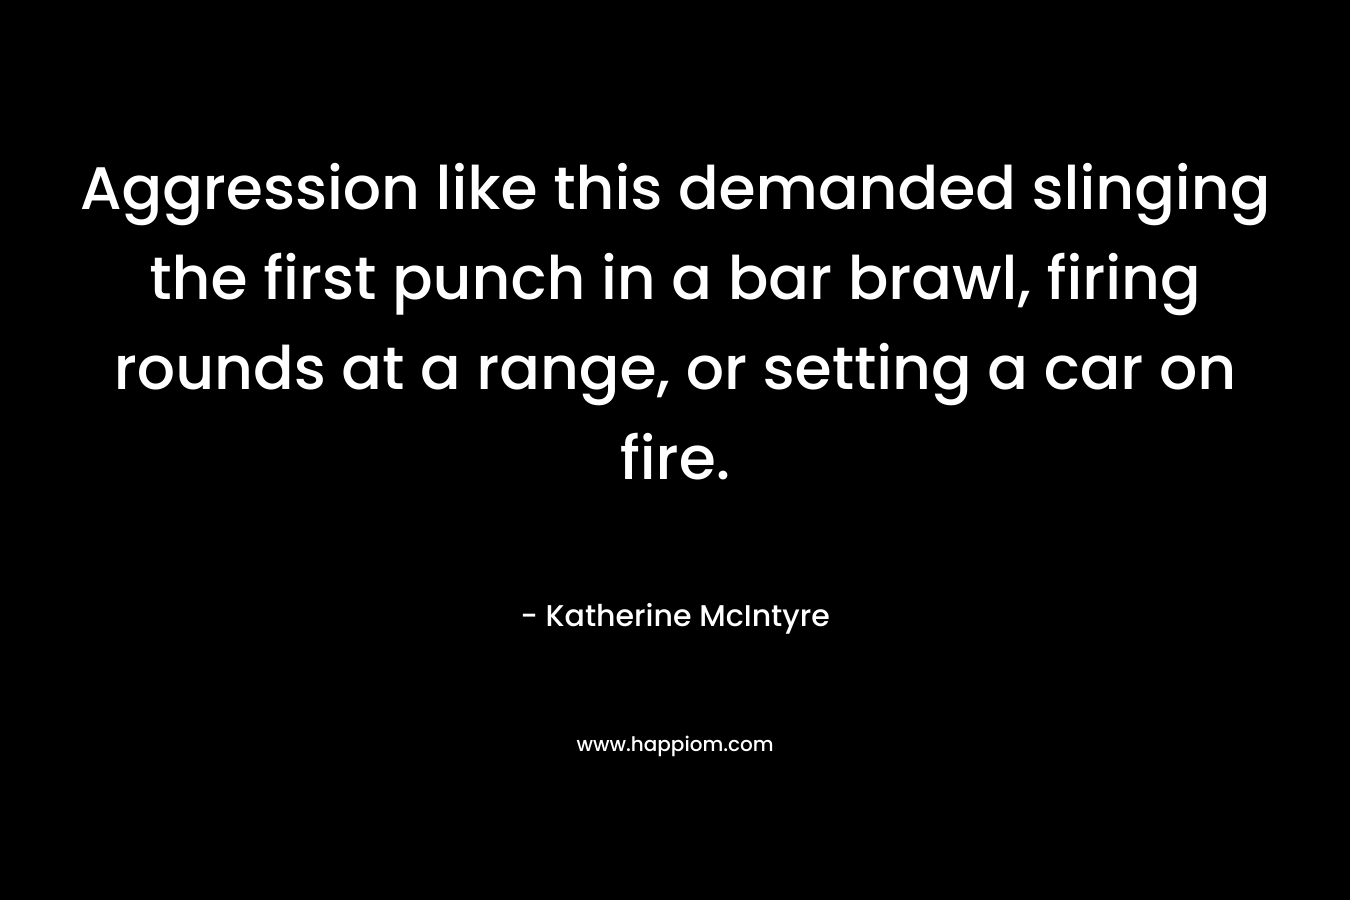 Aggression like this demanded slinging the first punch in a bar brawl, firing rounds at a range, or setting a car on fire. – Katherine McIntyre